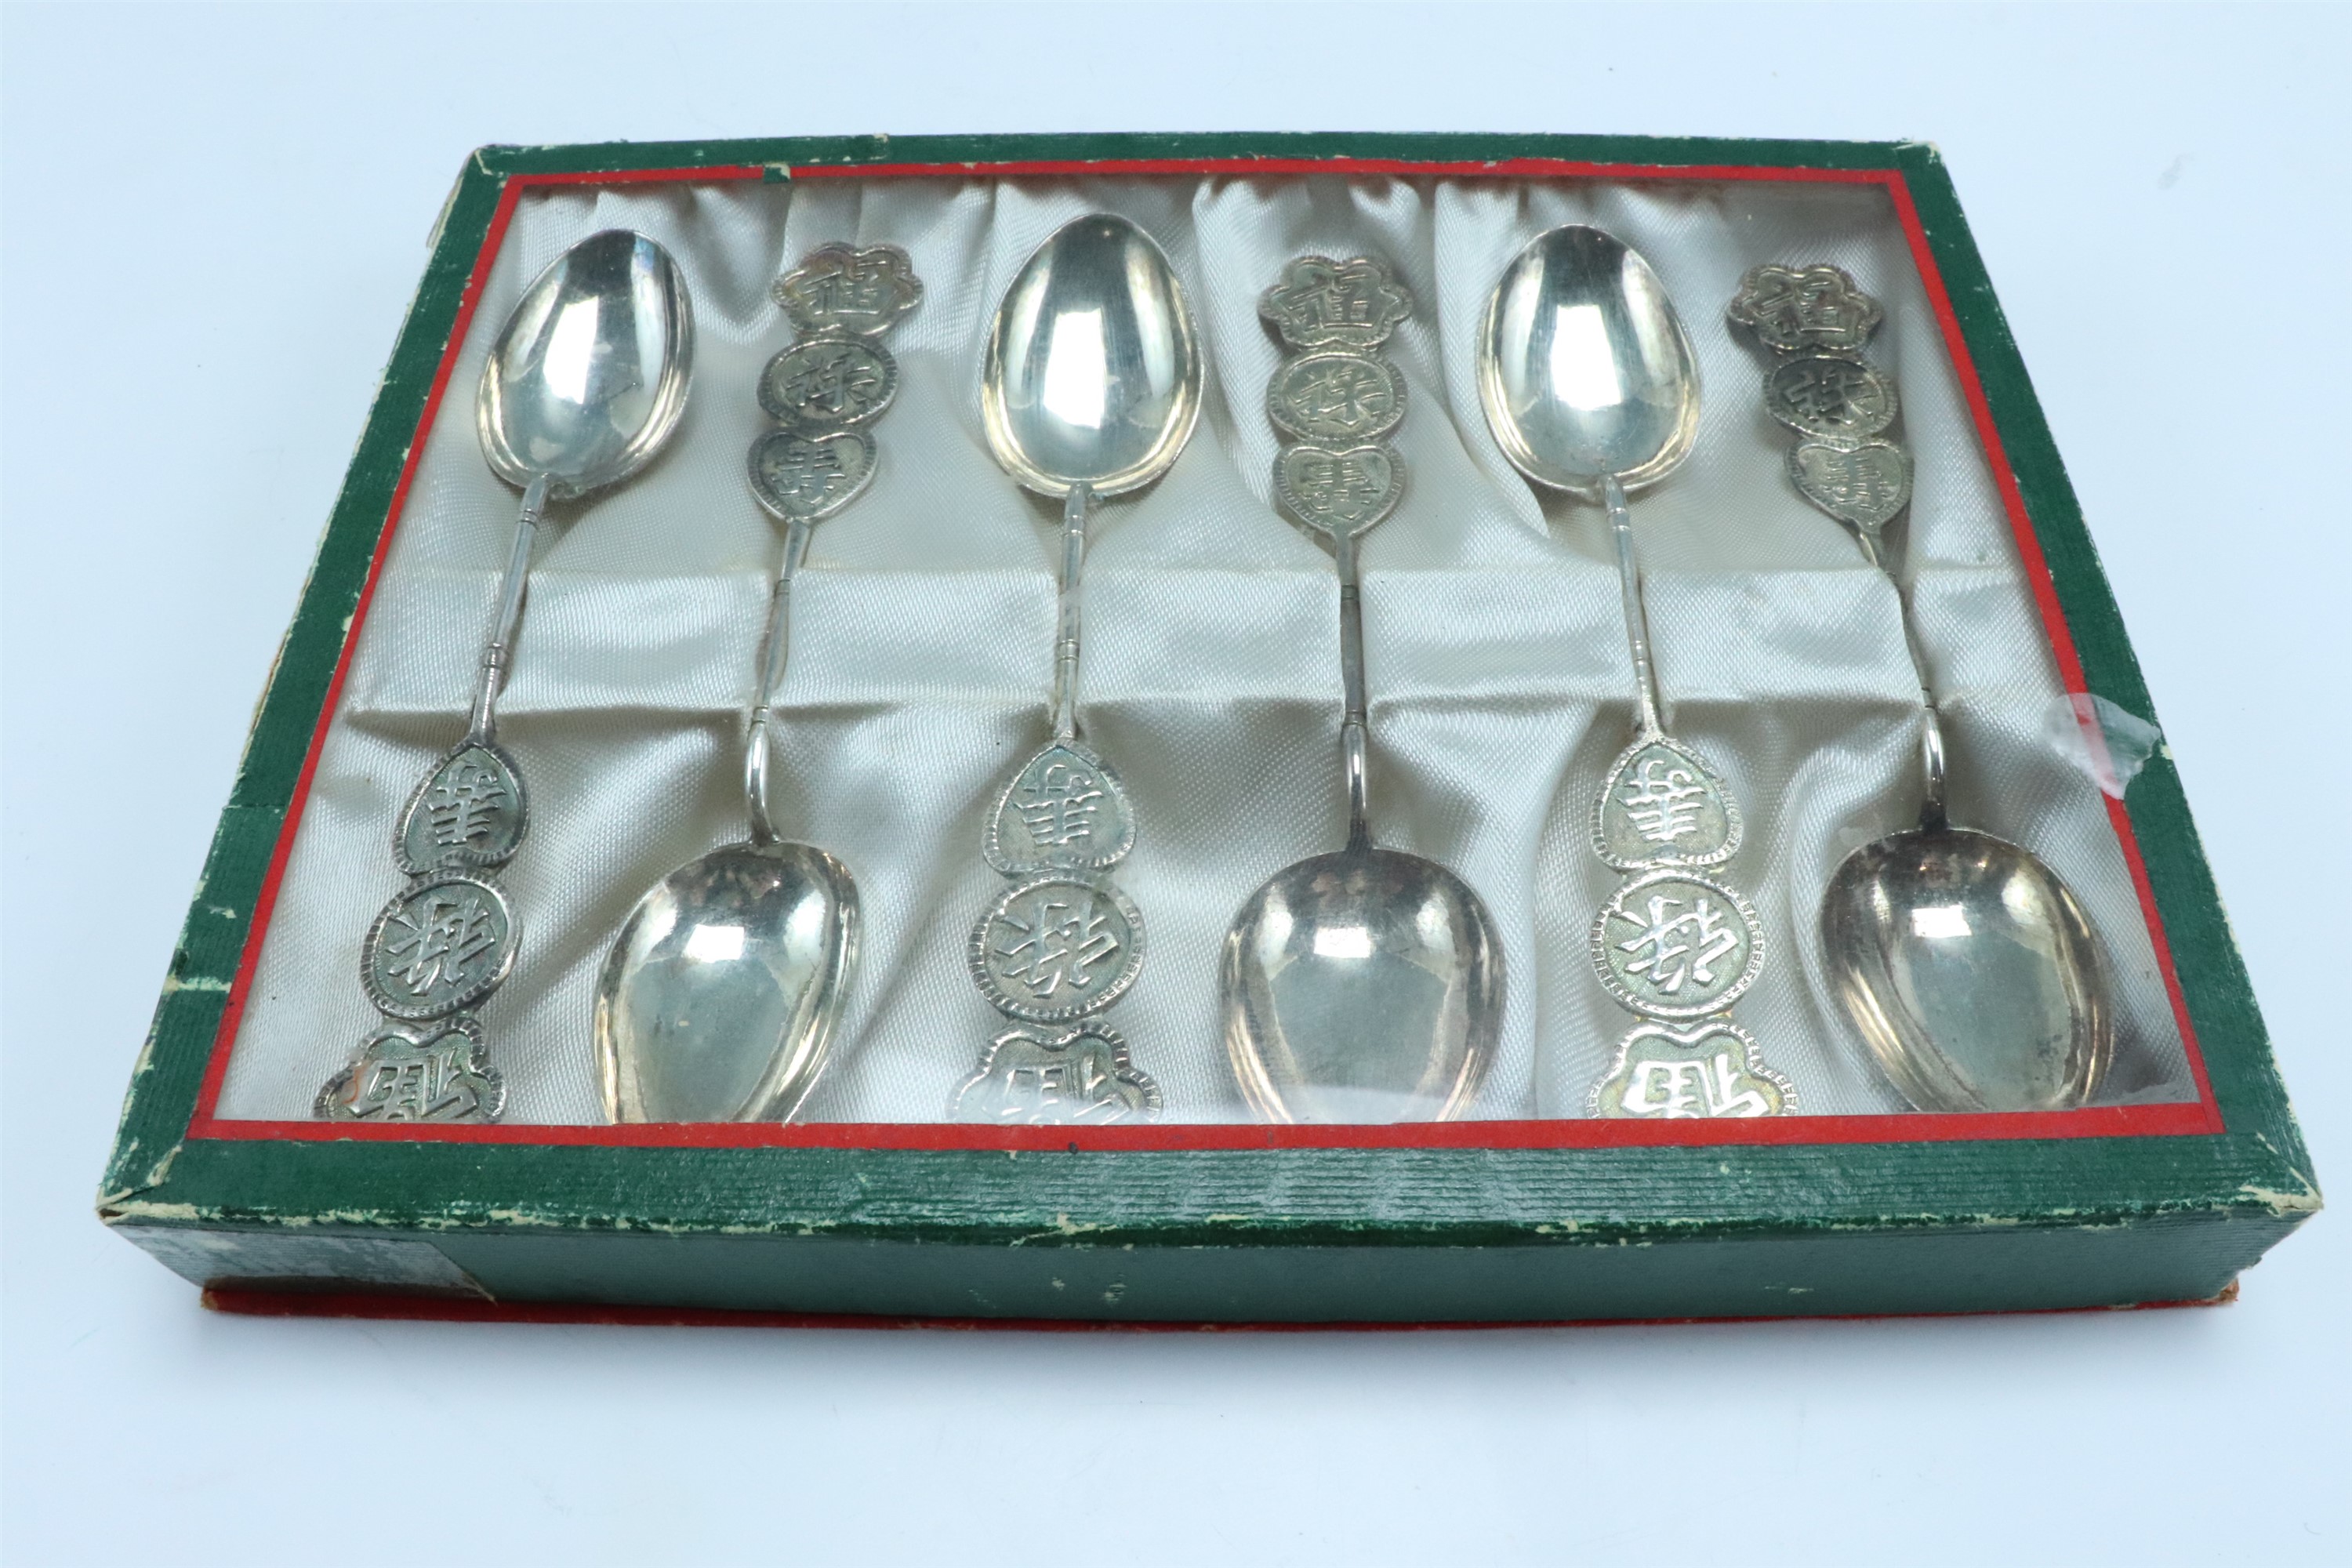 A set of six 1950s Chinese electroplated teaspoons, the handles decorated with Chinese